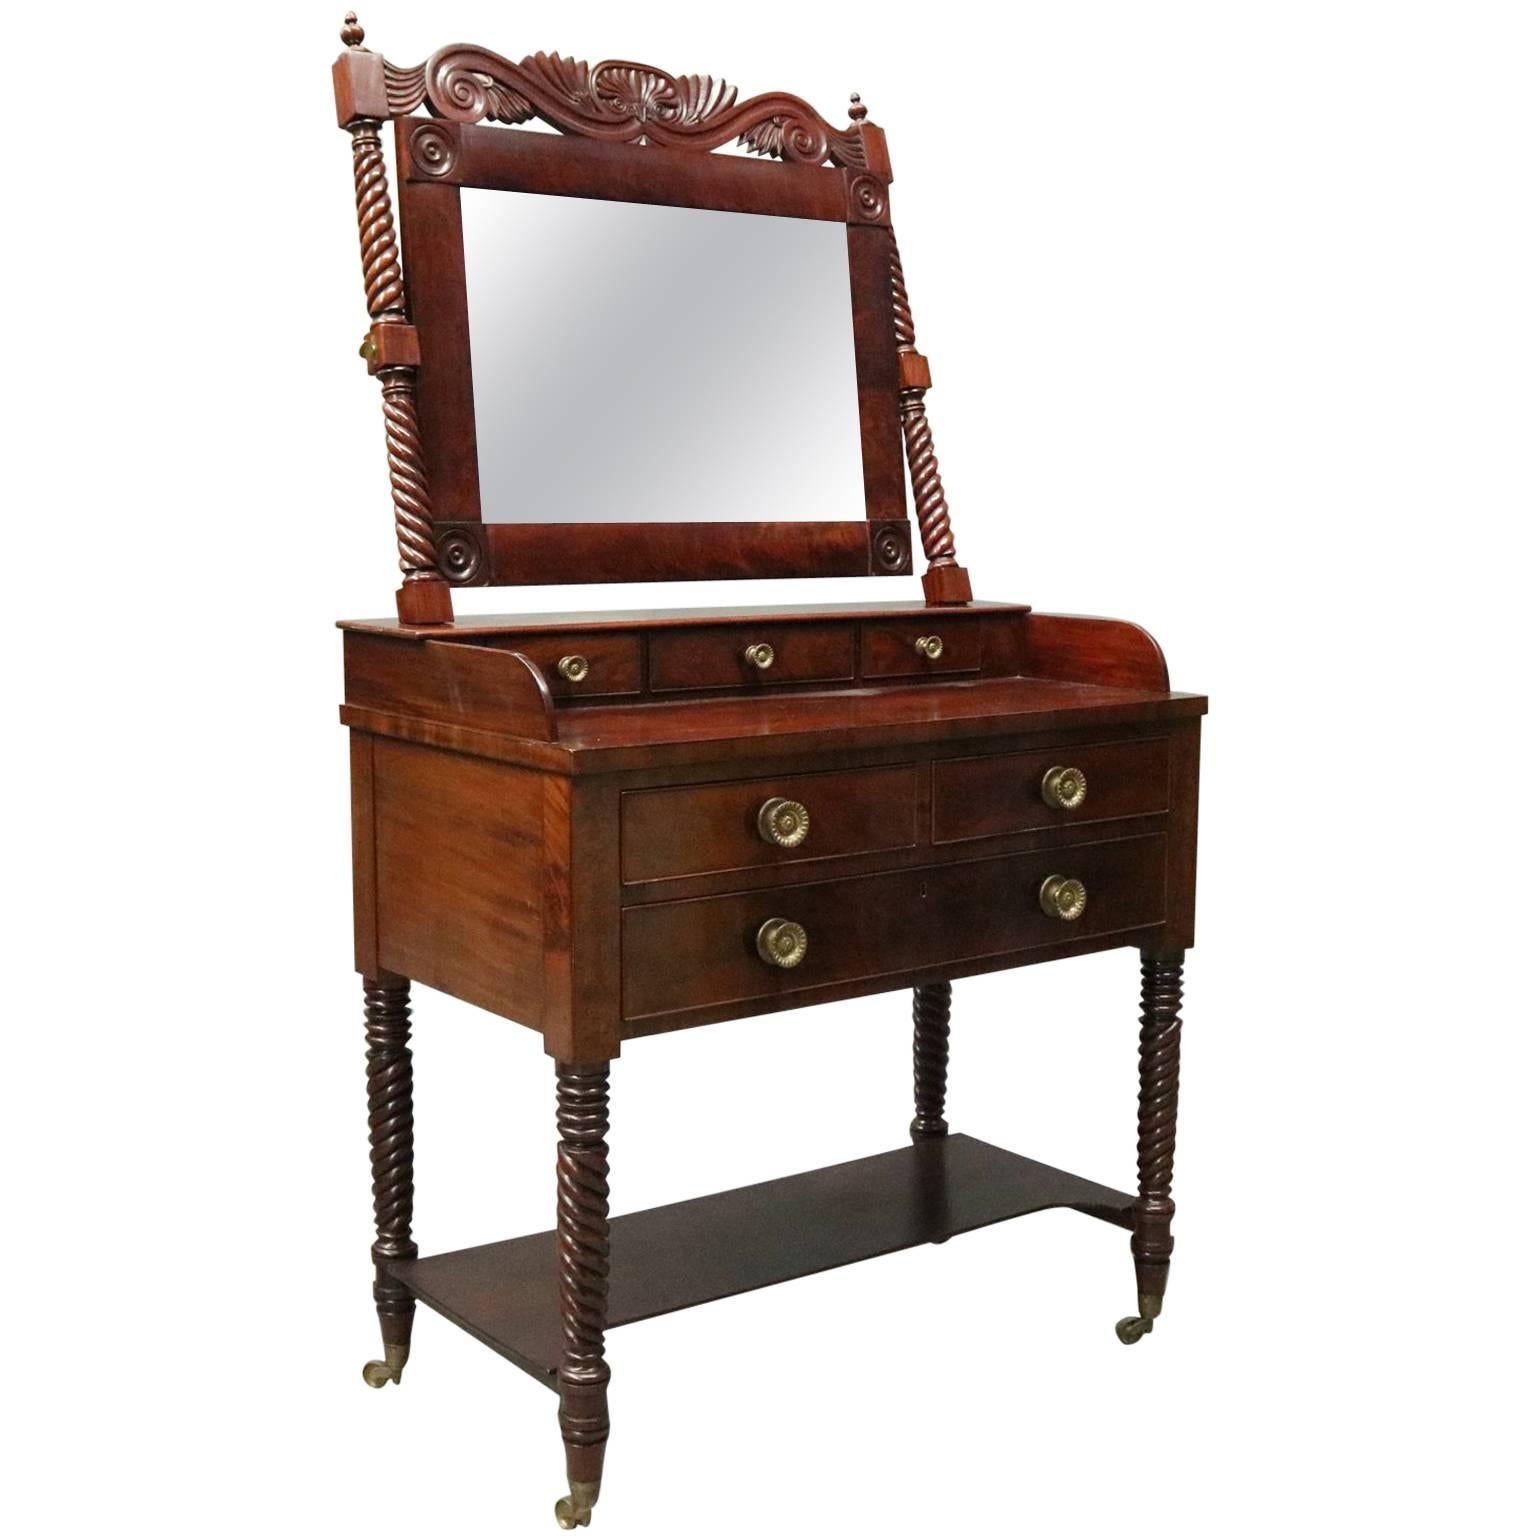 Antique Carved Flame Mahogany and Bronze Sheraton Mirrored Vanity, circa 1820